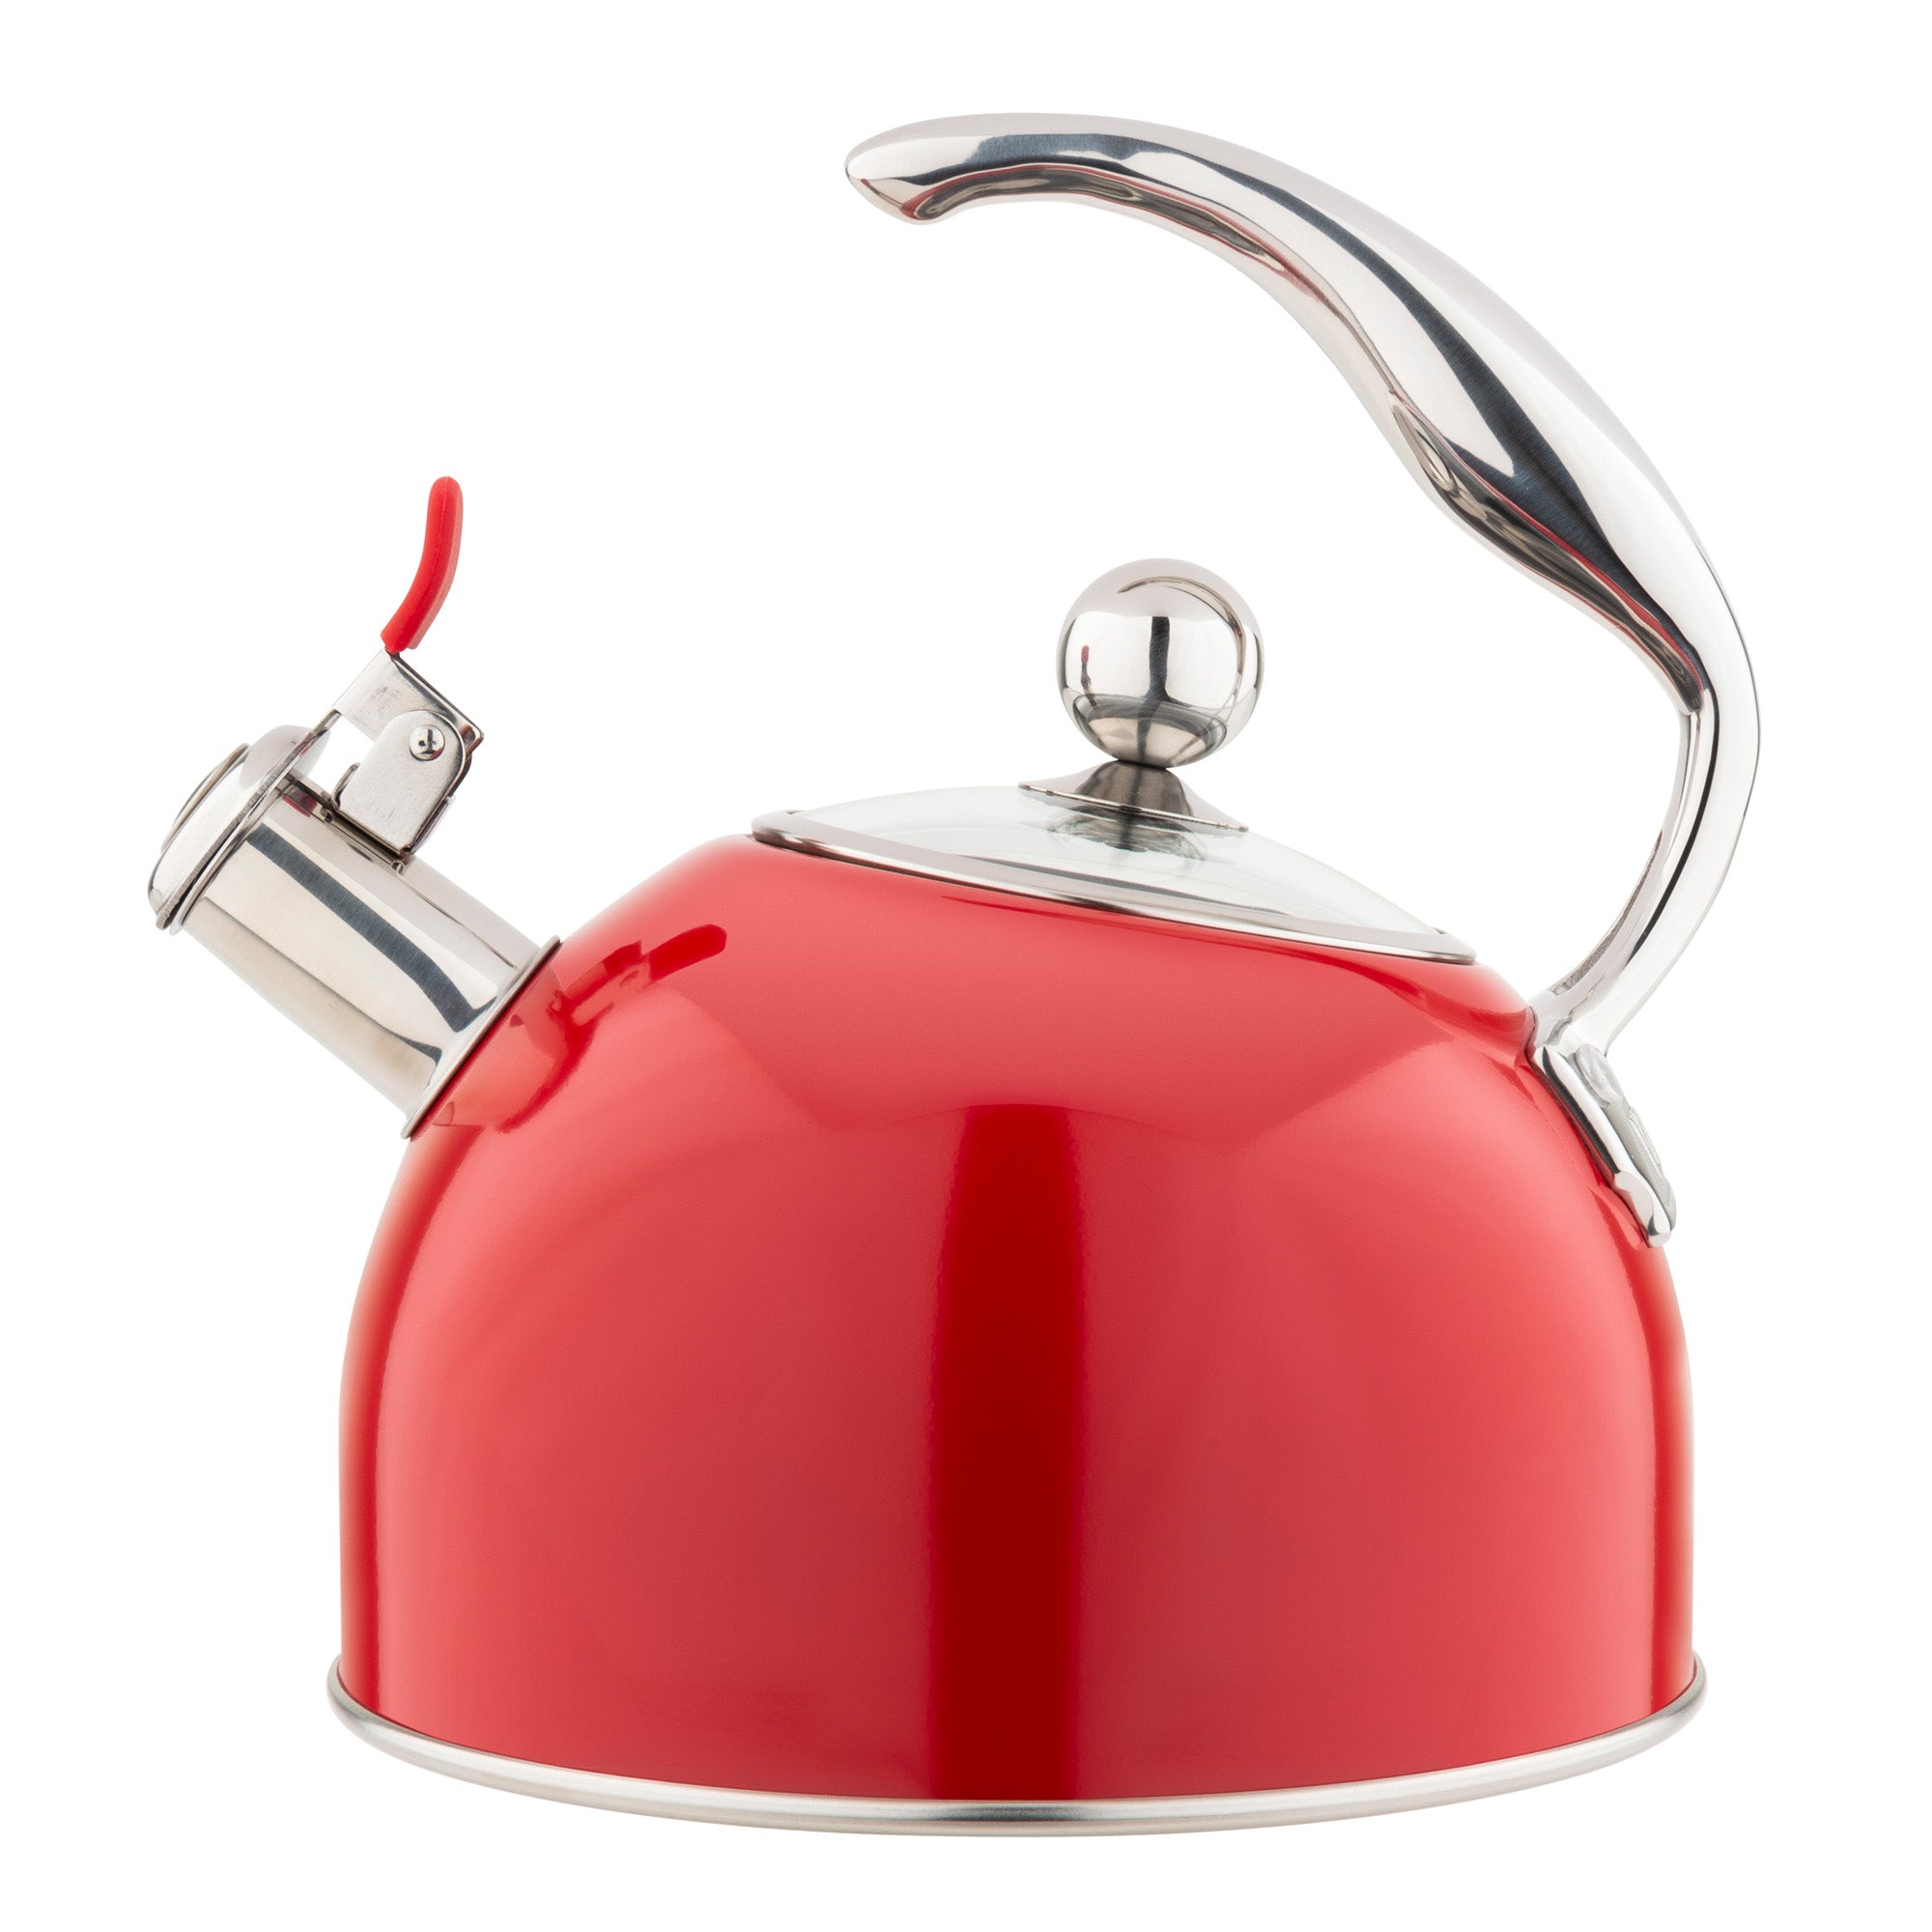 Chantal Whistling Tea Kettle in Onyx + Reviews